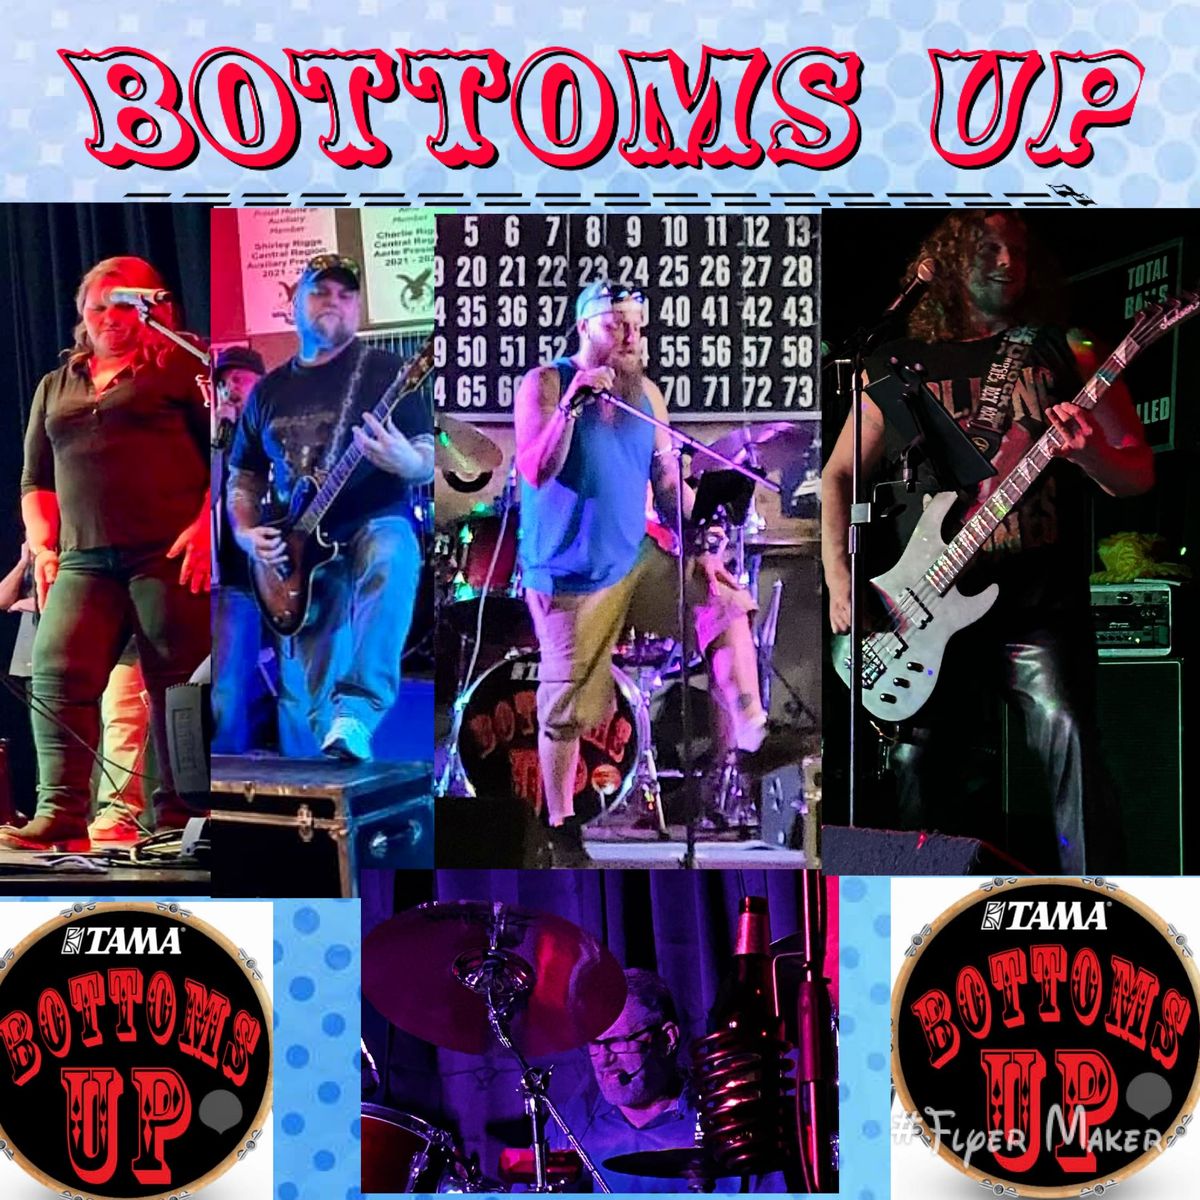 Bottoms Up rocking another Battle of the Bands